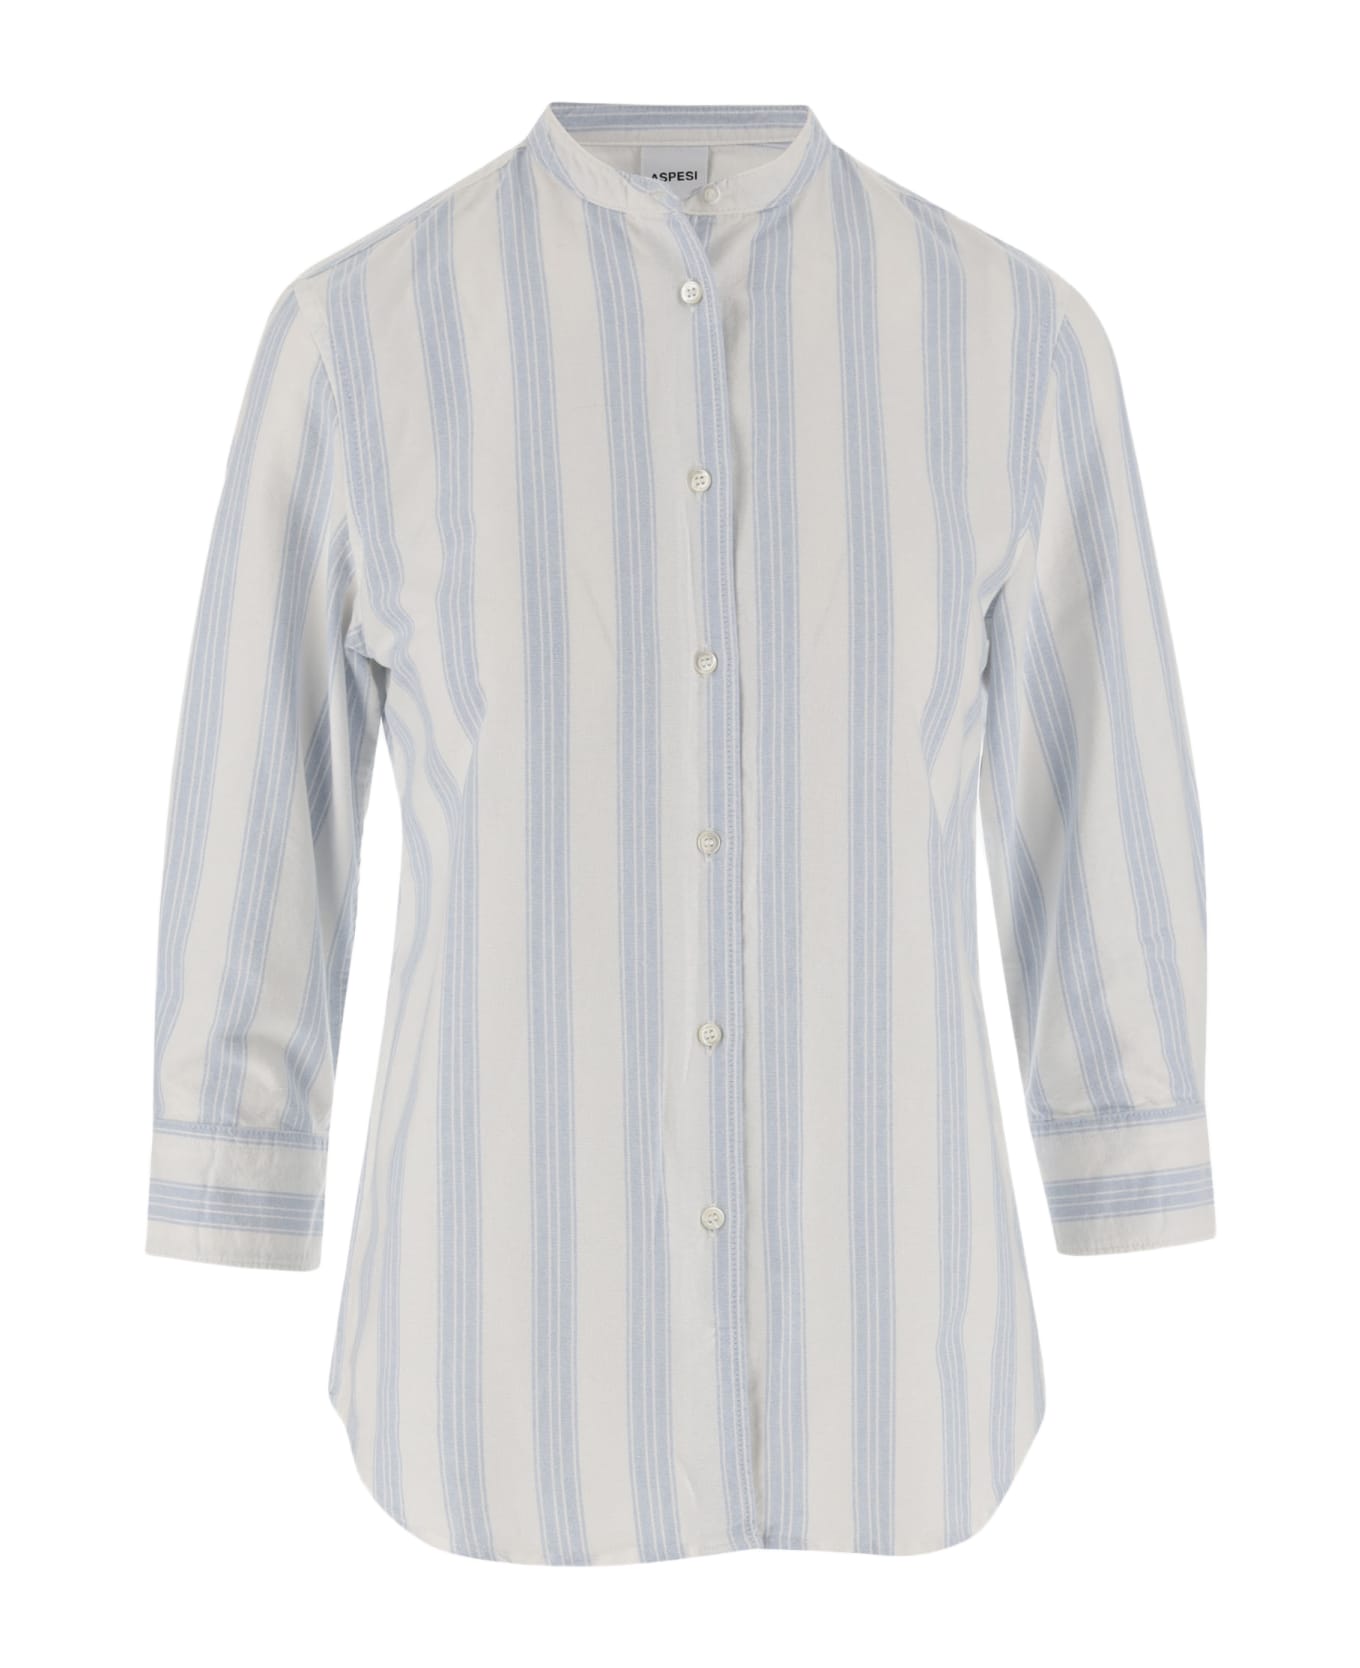 Aspesi Cotton Shirt With Striped Pattern - Clear Blue シャツ